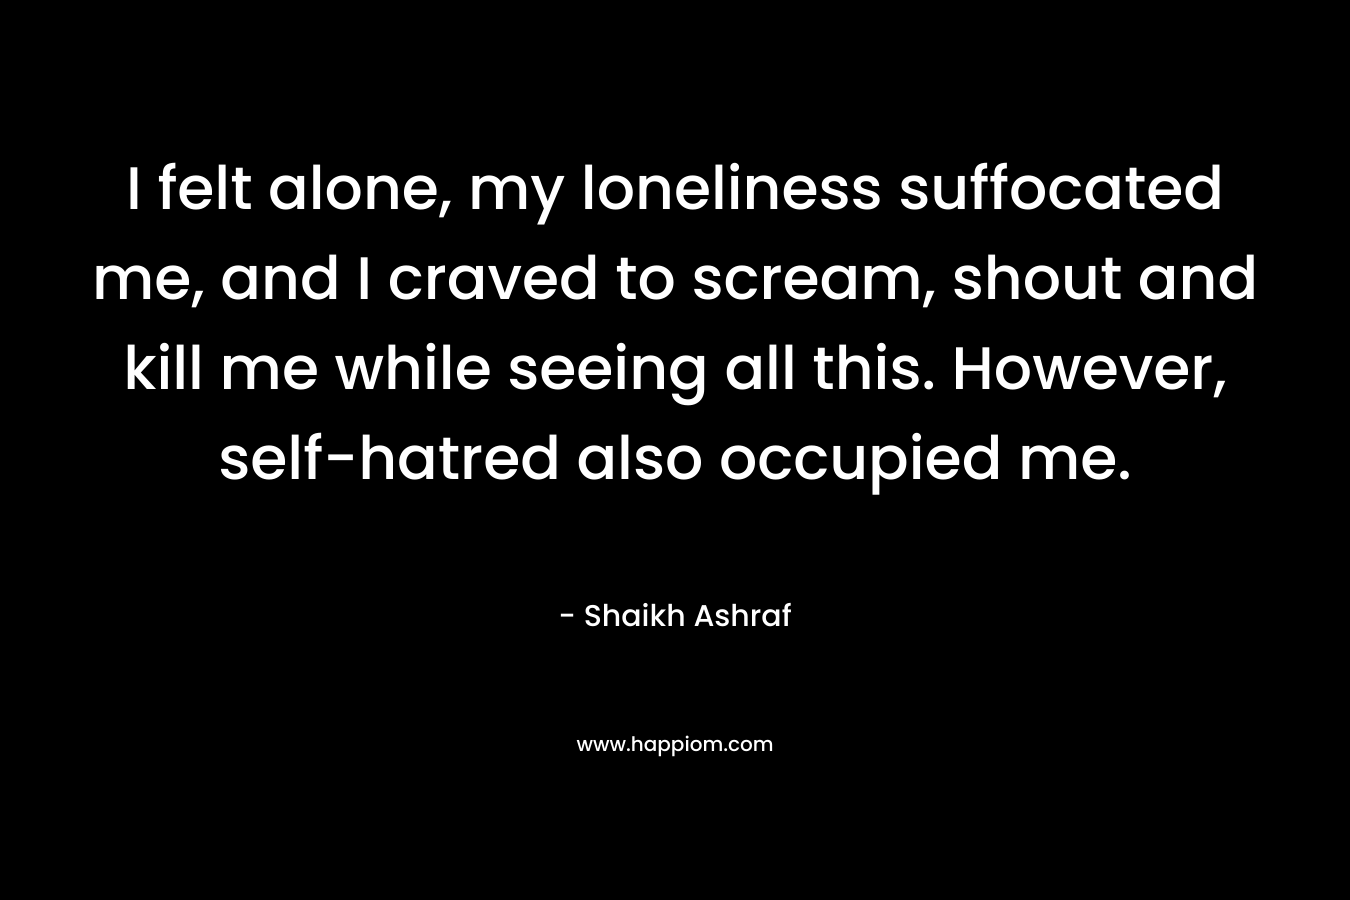 I felt alone, my loneliness suffocated me, and I craved to scream, shout and kill me while seeing all this. However, self-hatred also occupied me. – Shaikh Ashraf